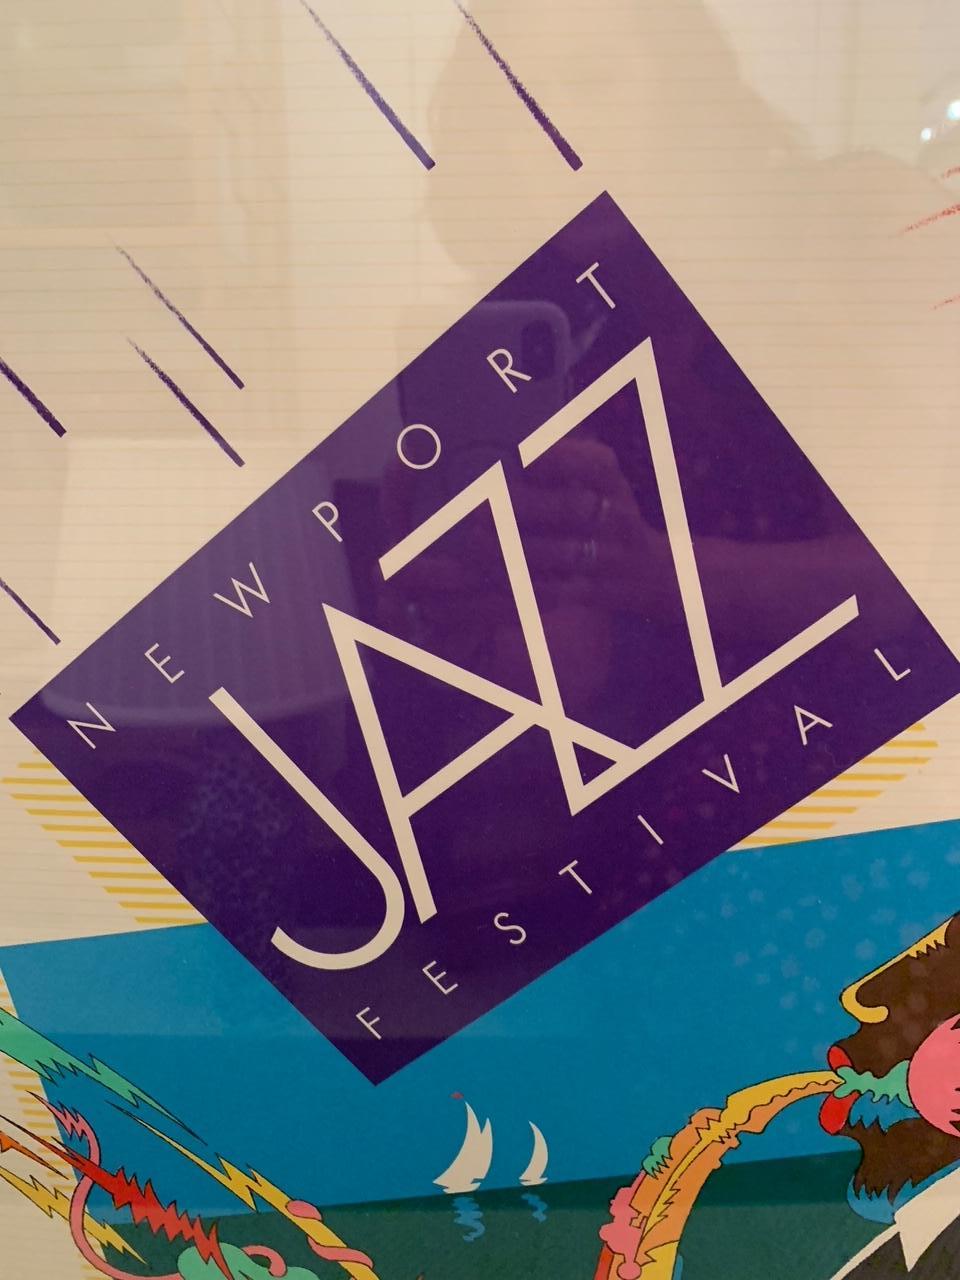 A colorful graphic limited edition Newport Jazz festival poster having embossed marking and number on lower left.